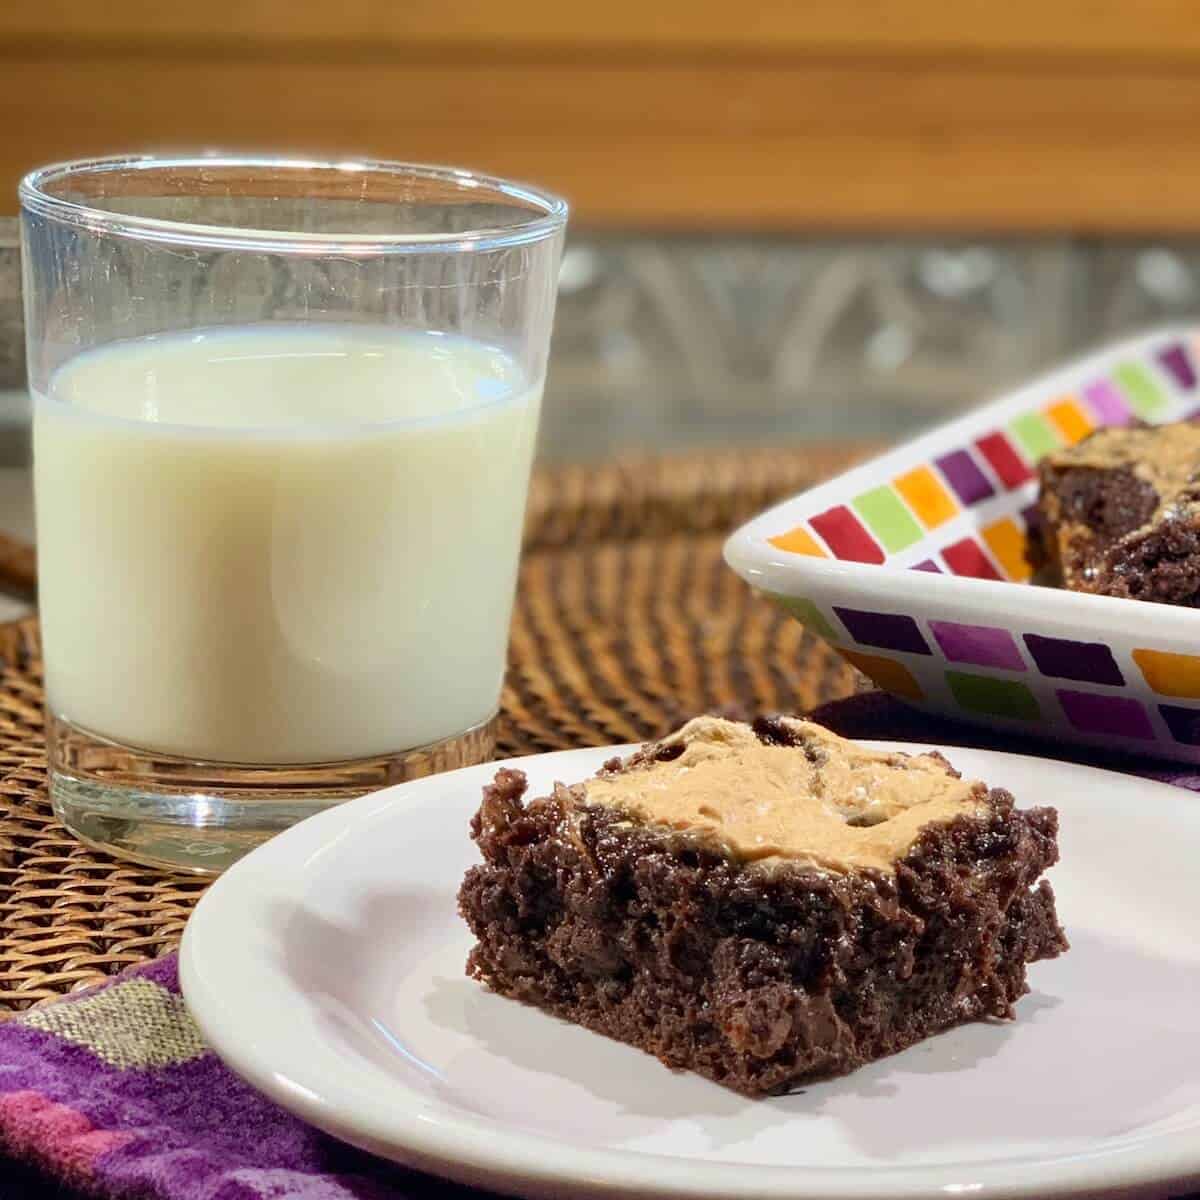 Marshmallow topped brownie on a white plate next to a glass of milk all on a woven tray.